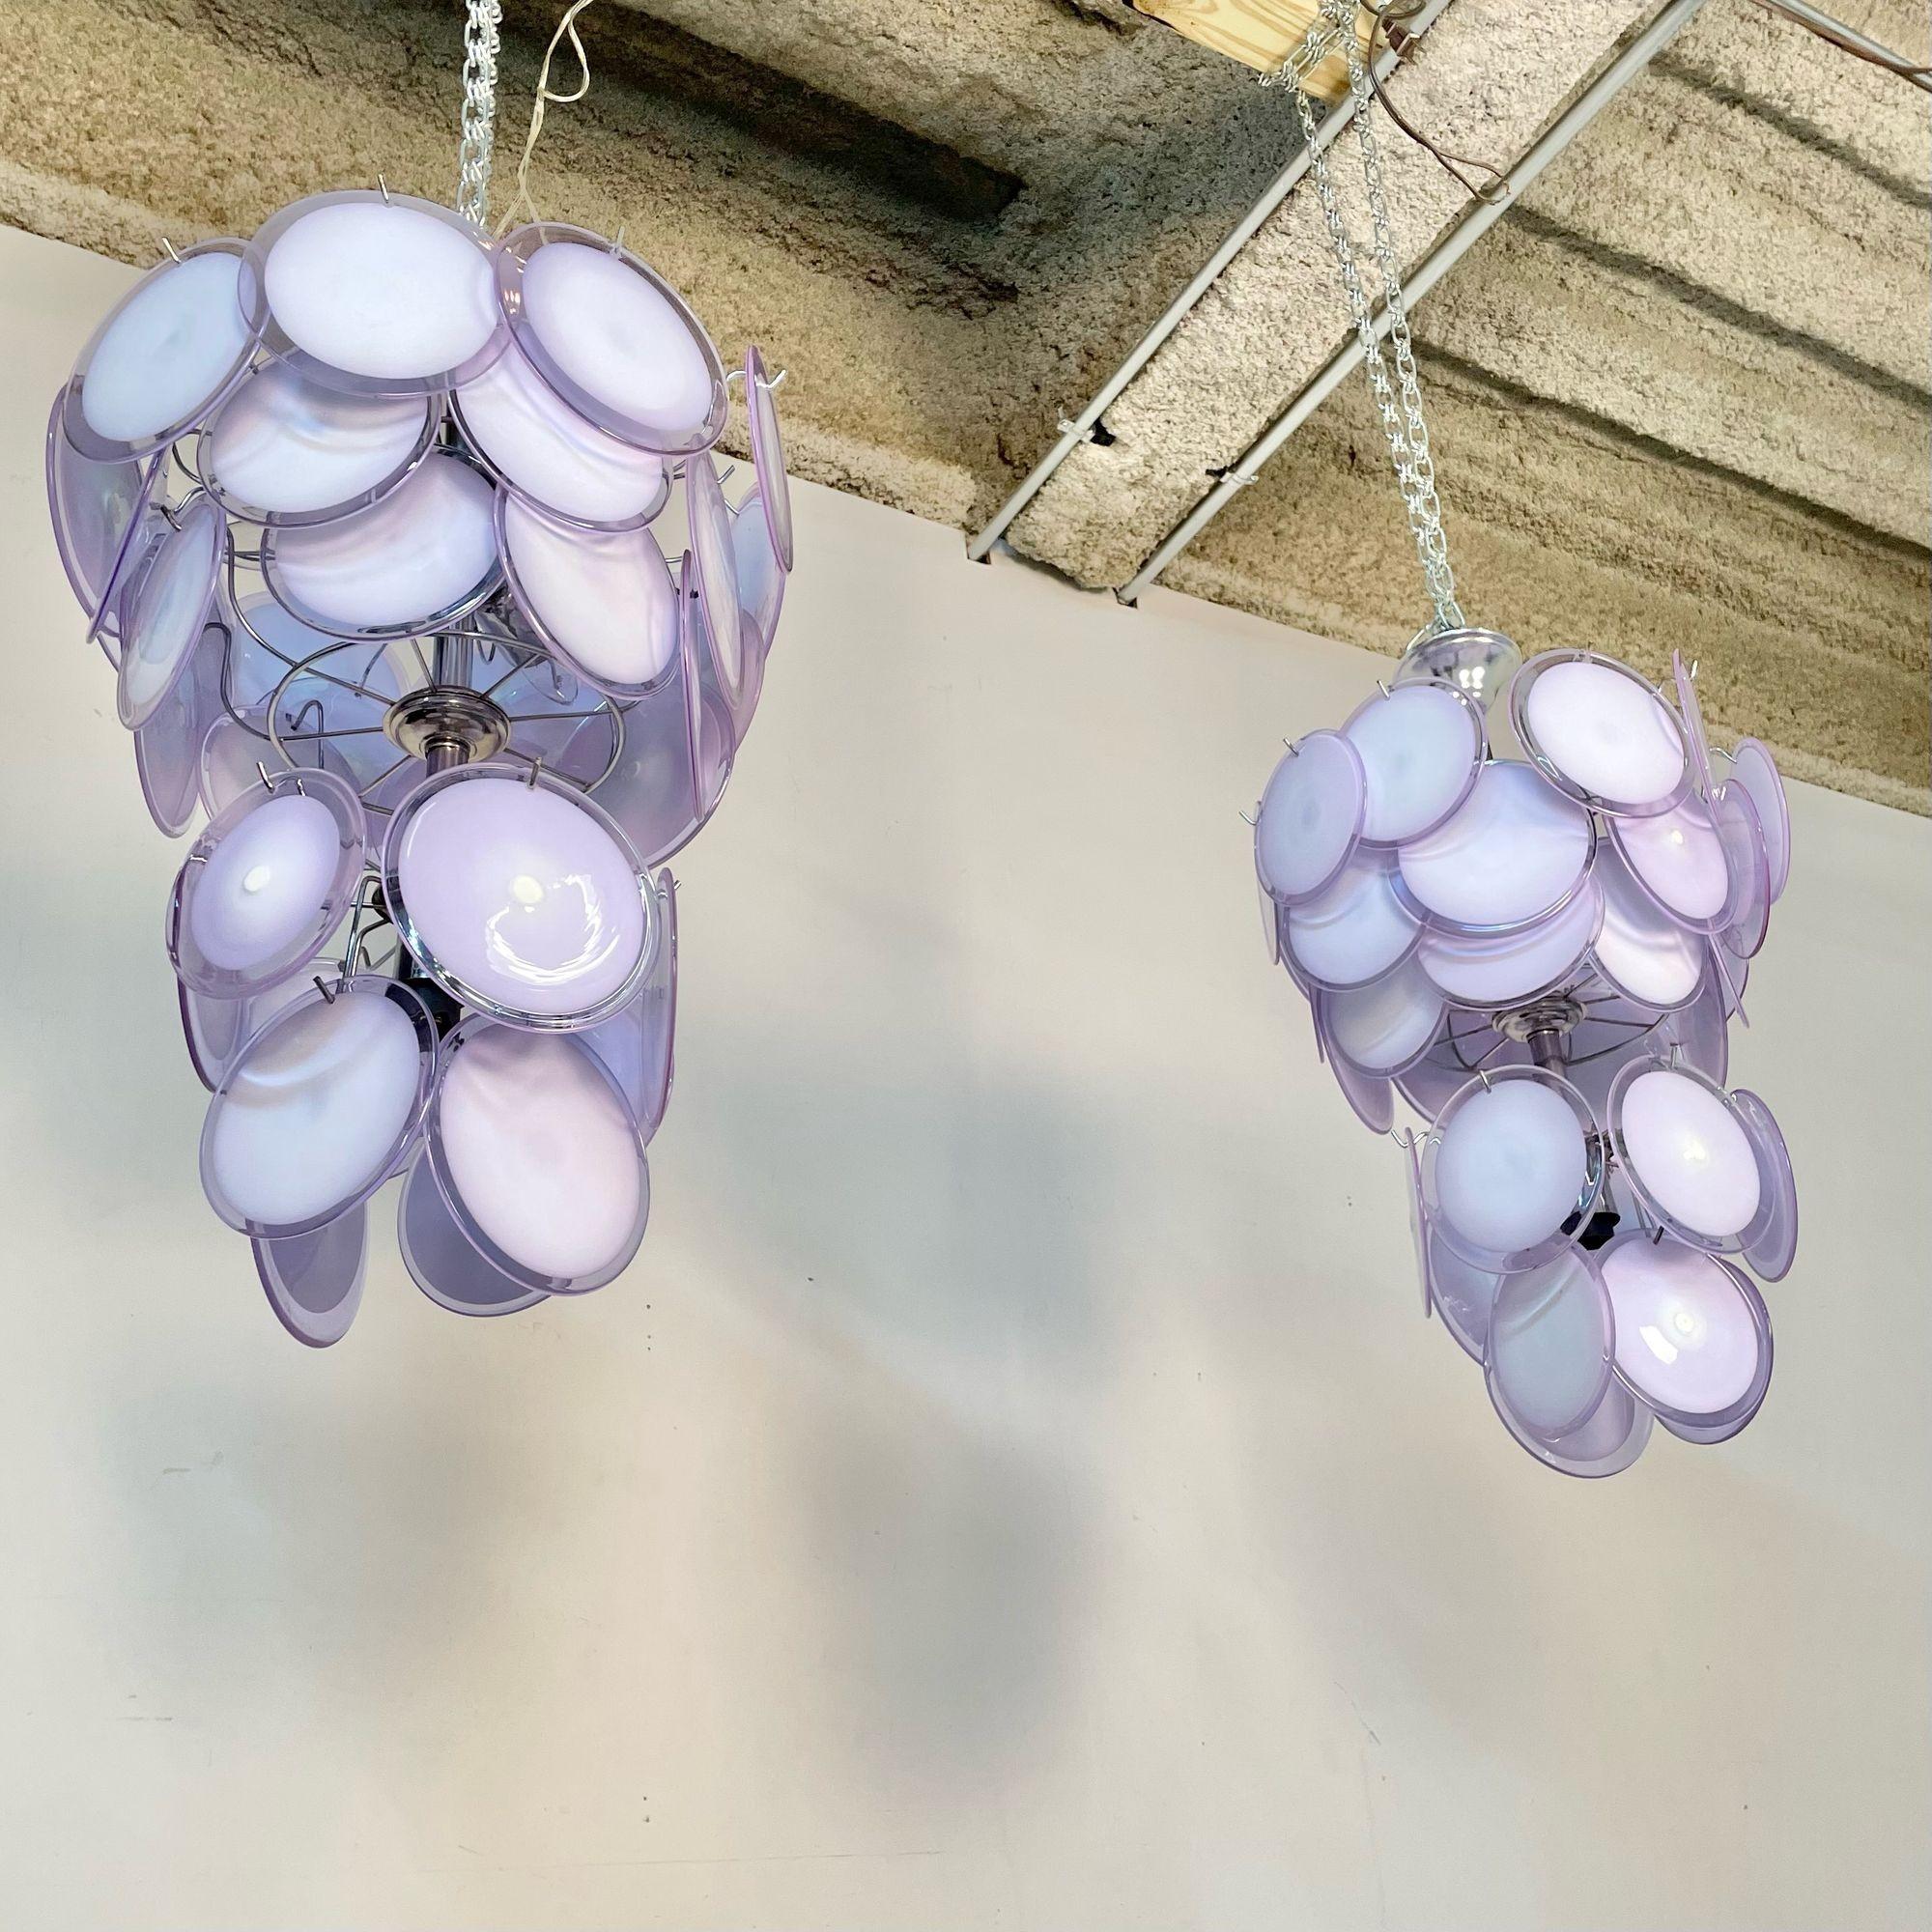 American Pair of Mid-Century Modern Style Purple Murano Glass Disk Chandeliers For Sale